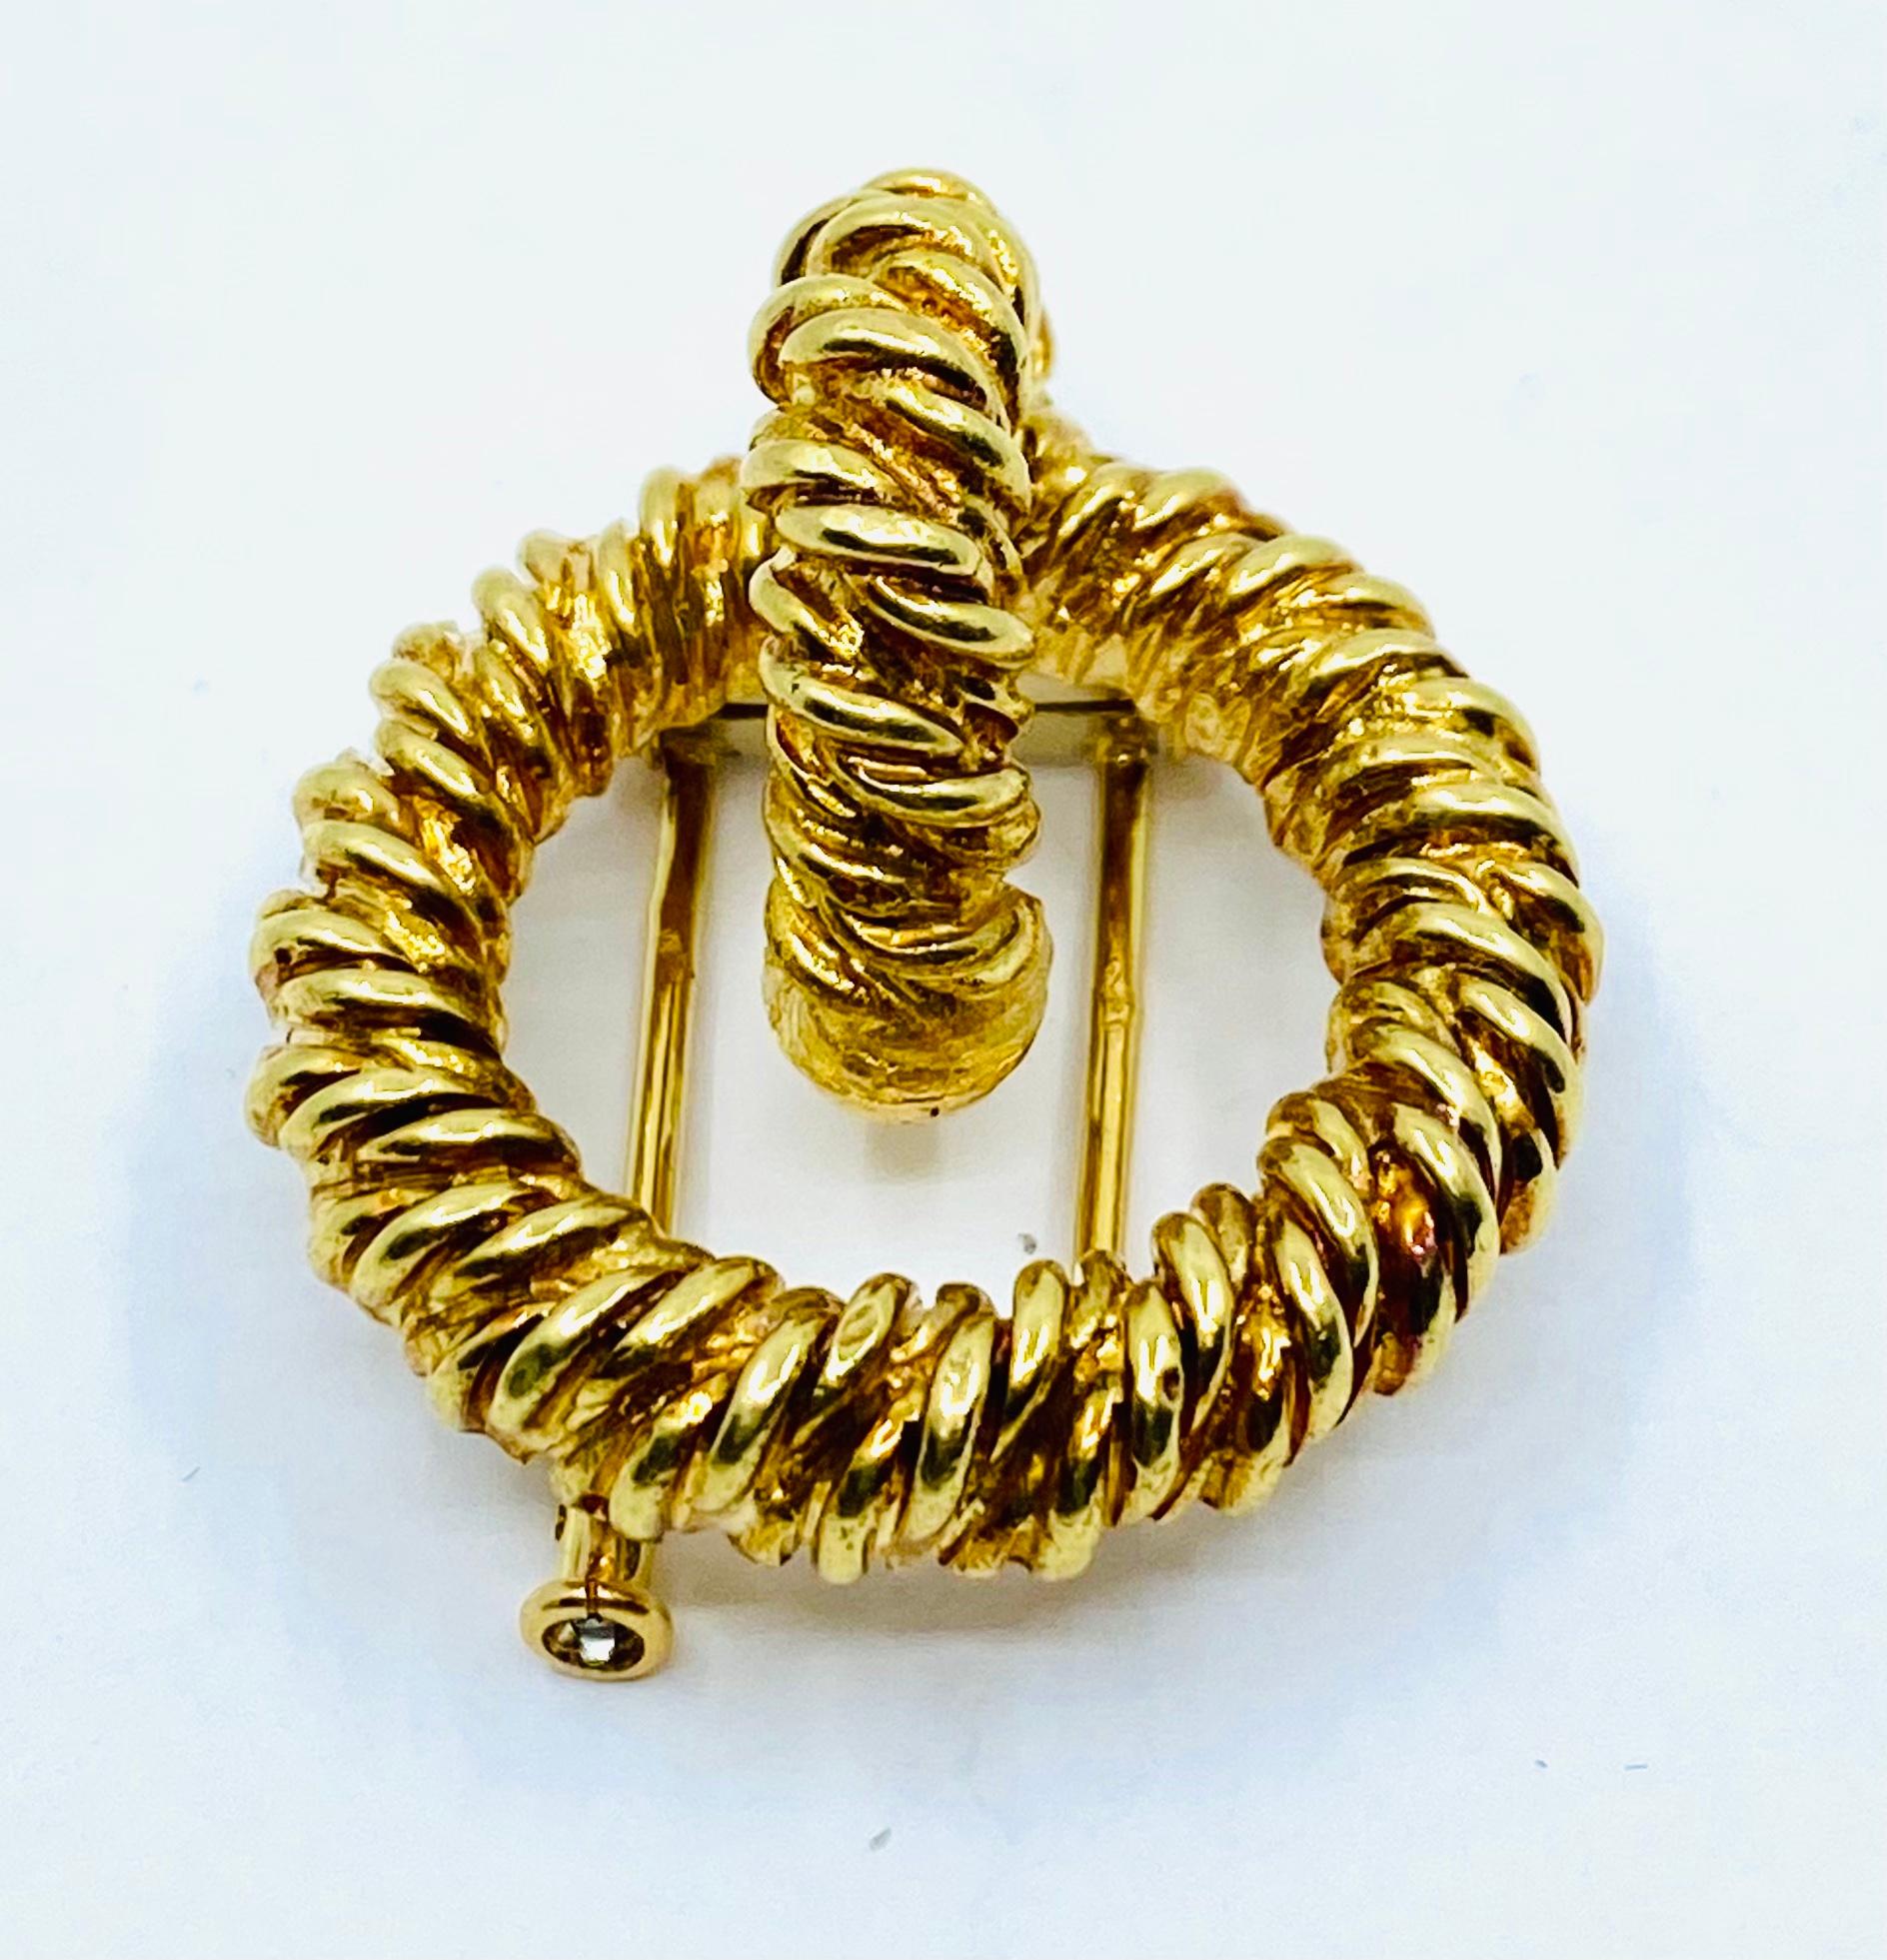 Hermès 18k Gold Knot Vintage Brooch In Excellent Condition For Sale In Beverly Hills, CA